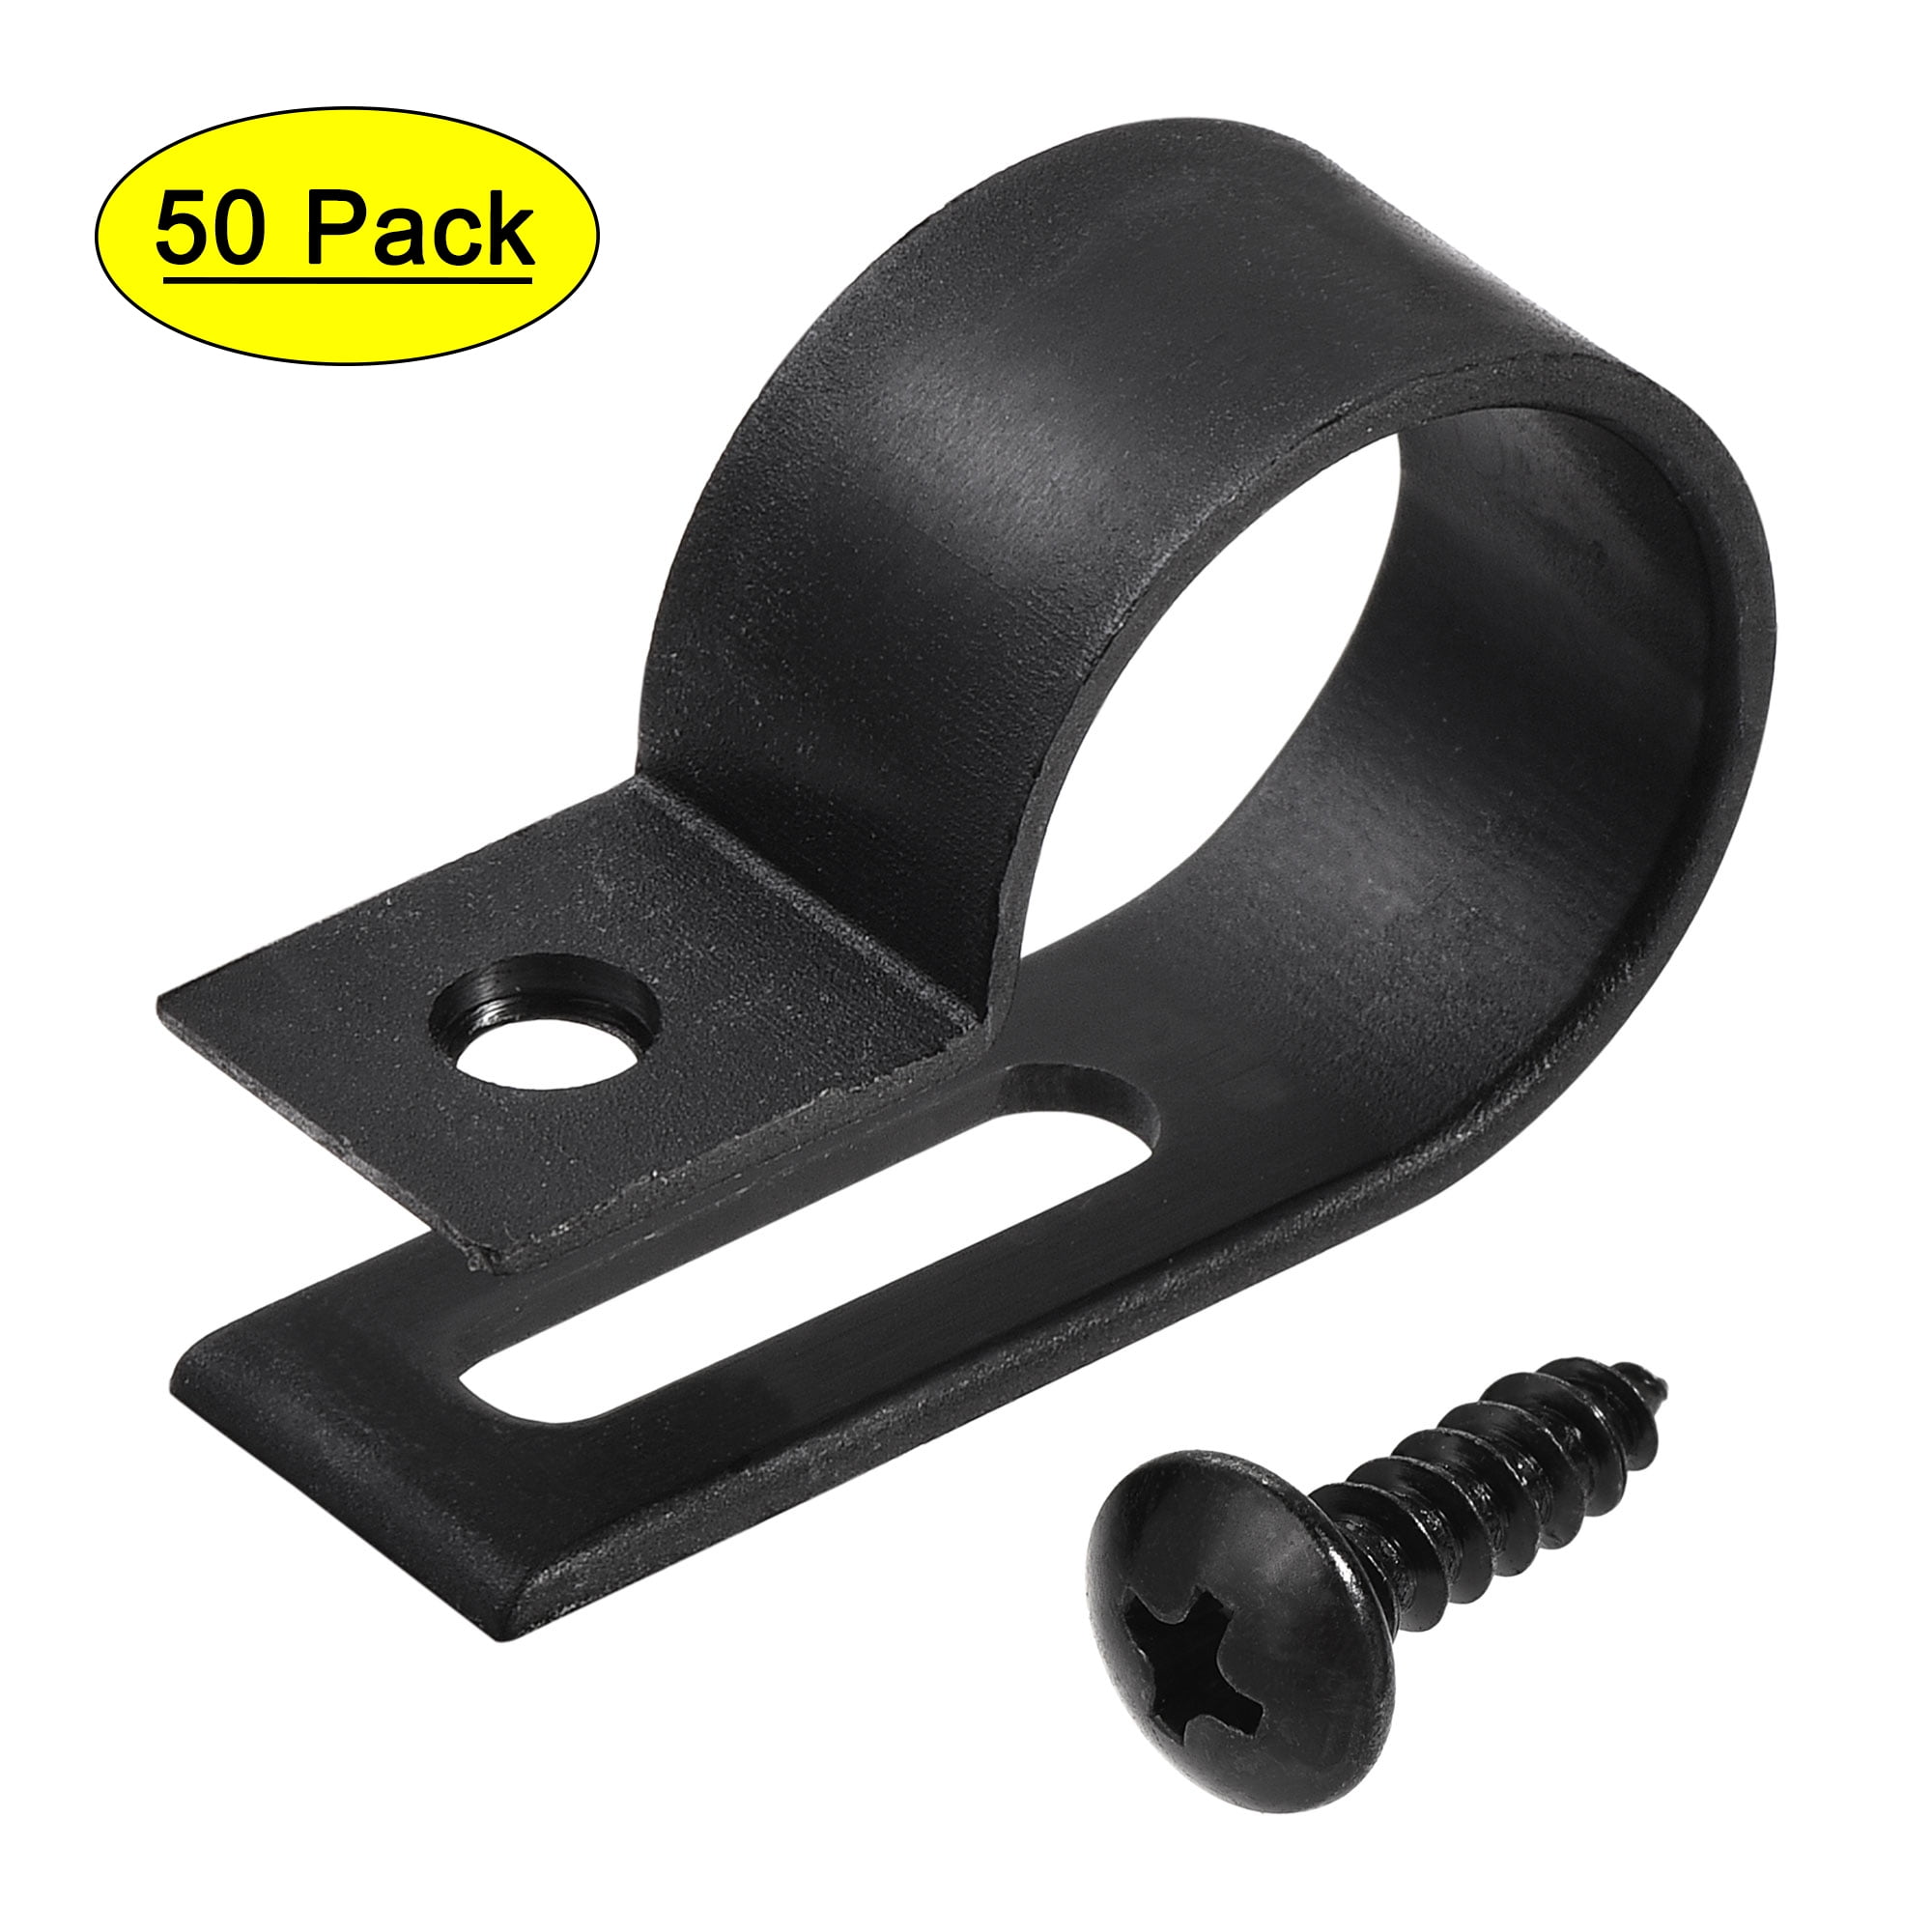 P Clip Plastic Nylon for Hose Pipe Hook Cable/Wire/Tubing Wall Clamp/Mount 